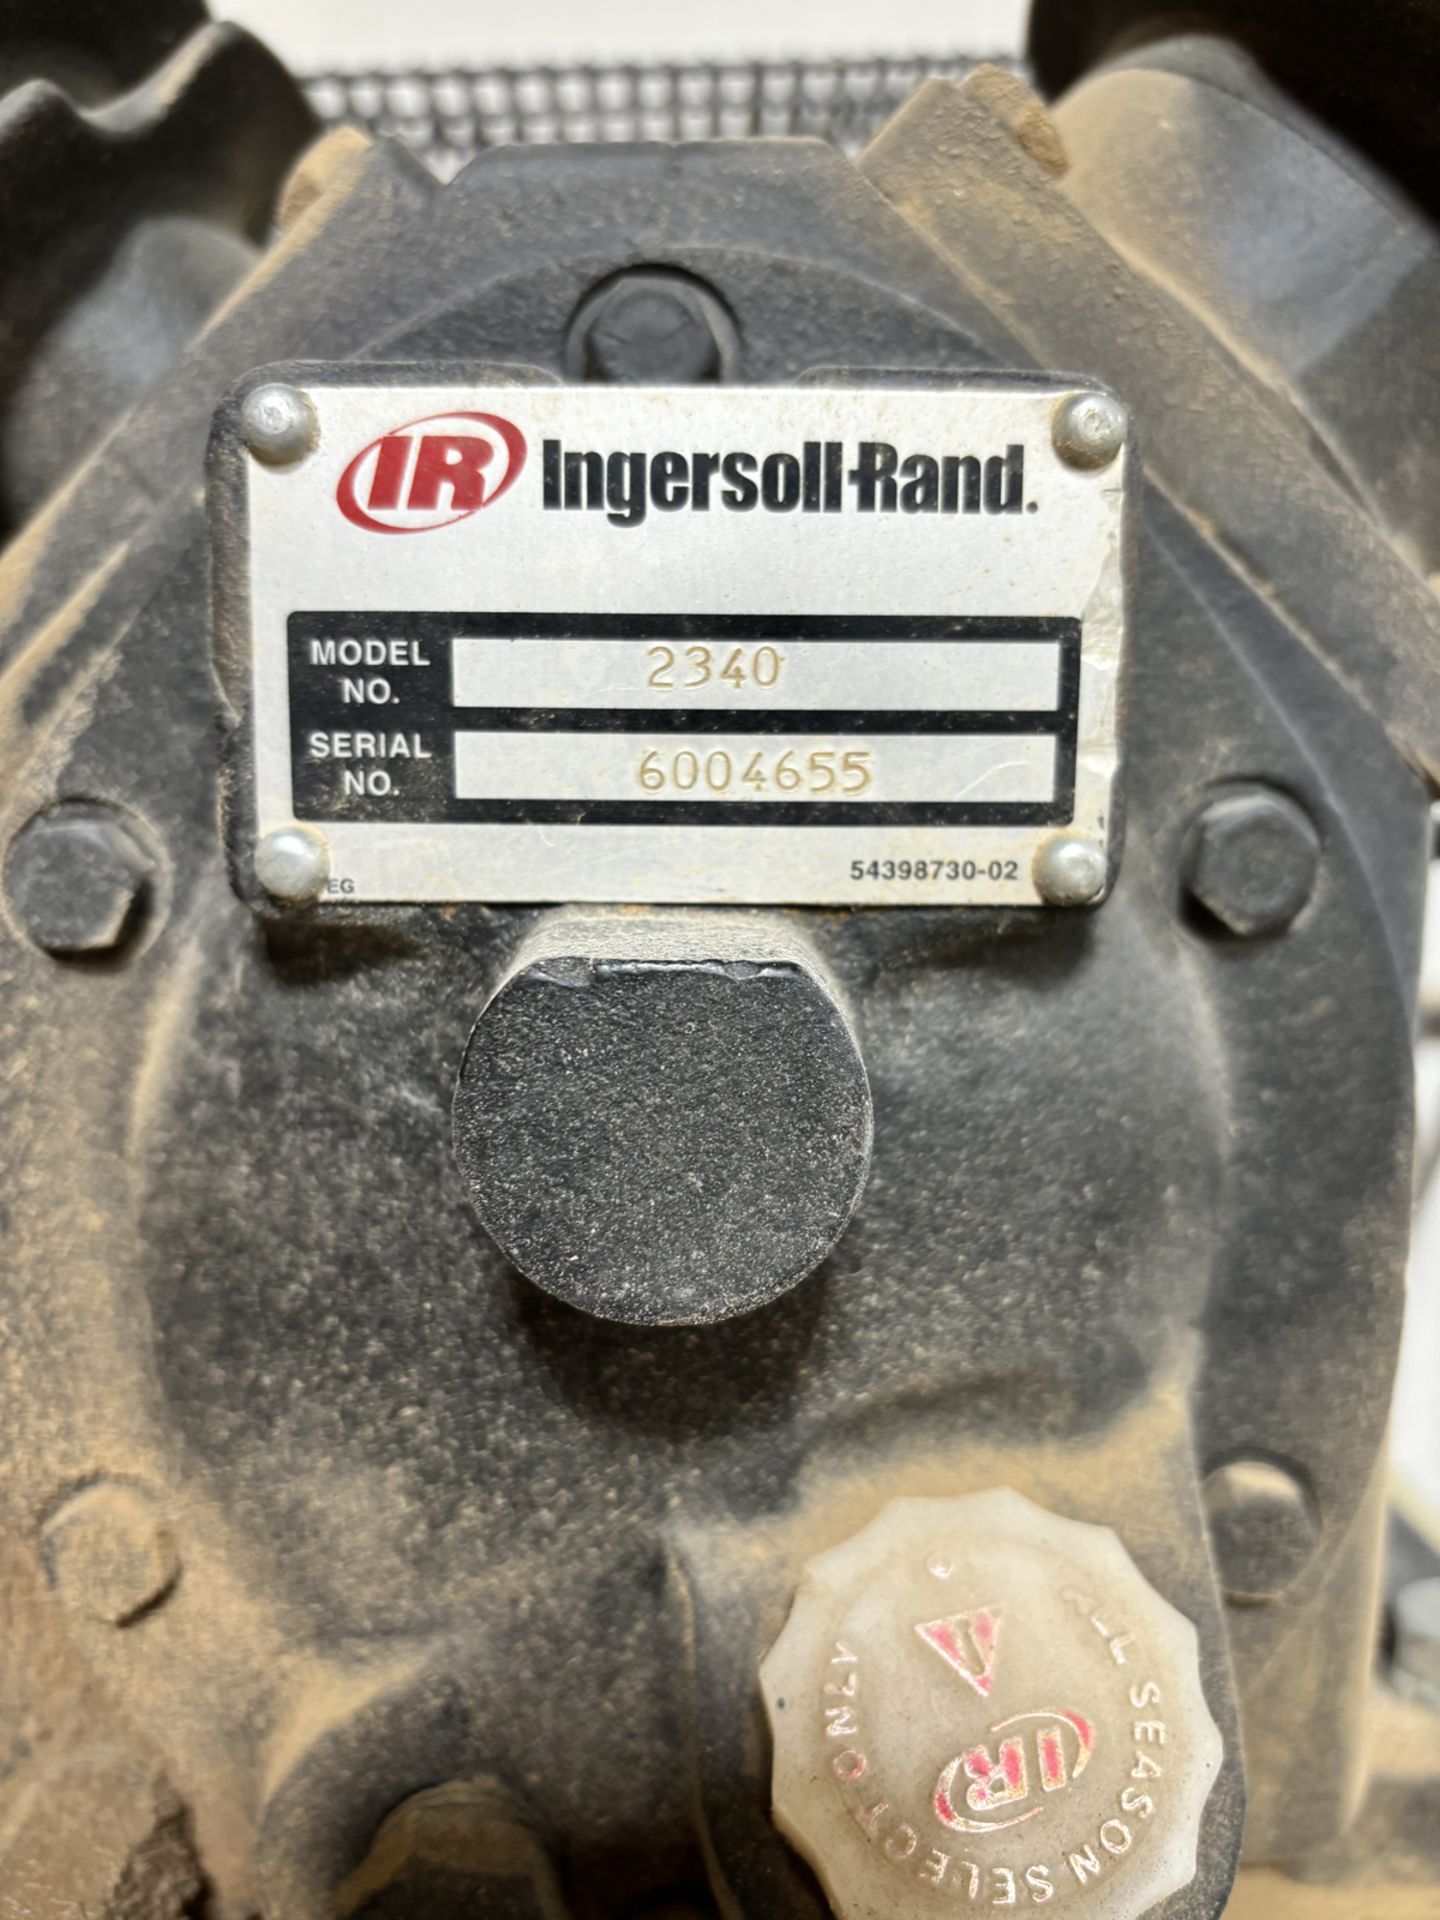 Ingersoll Rand 5HP Air Compressor - Image 4 of 4